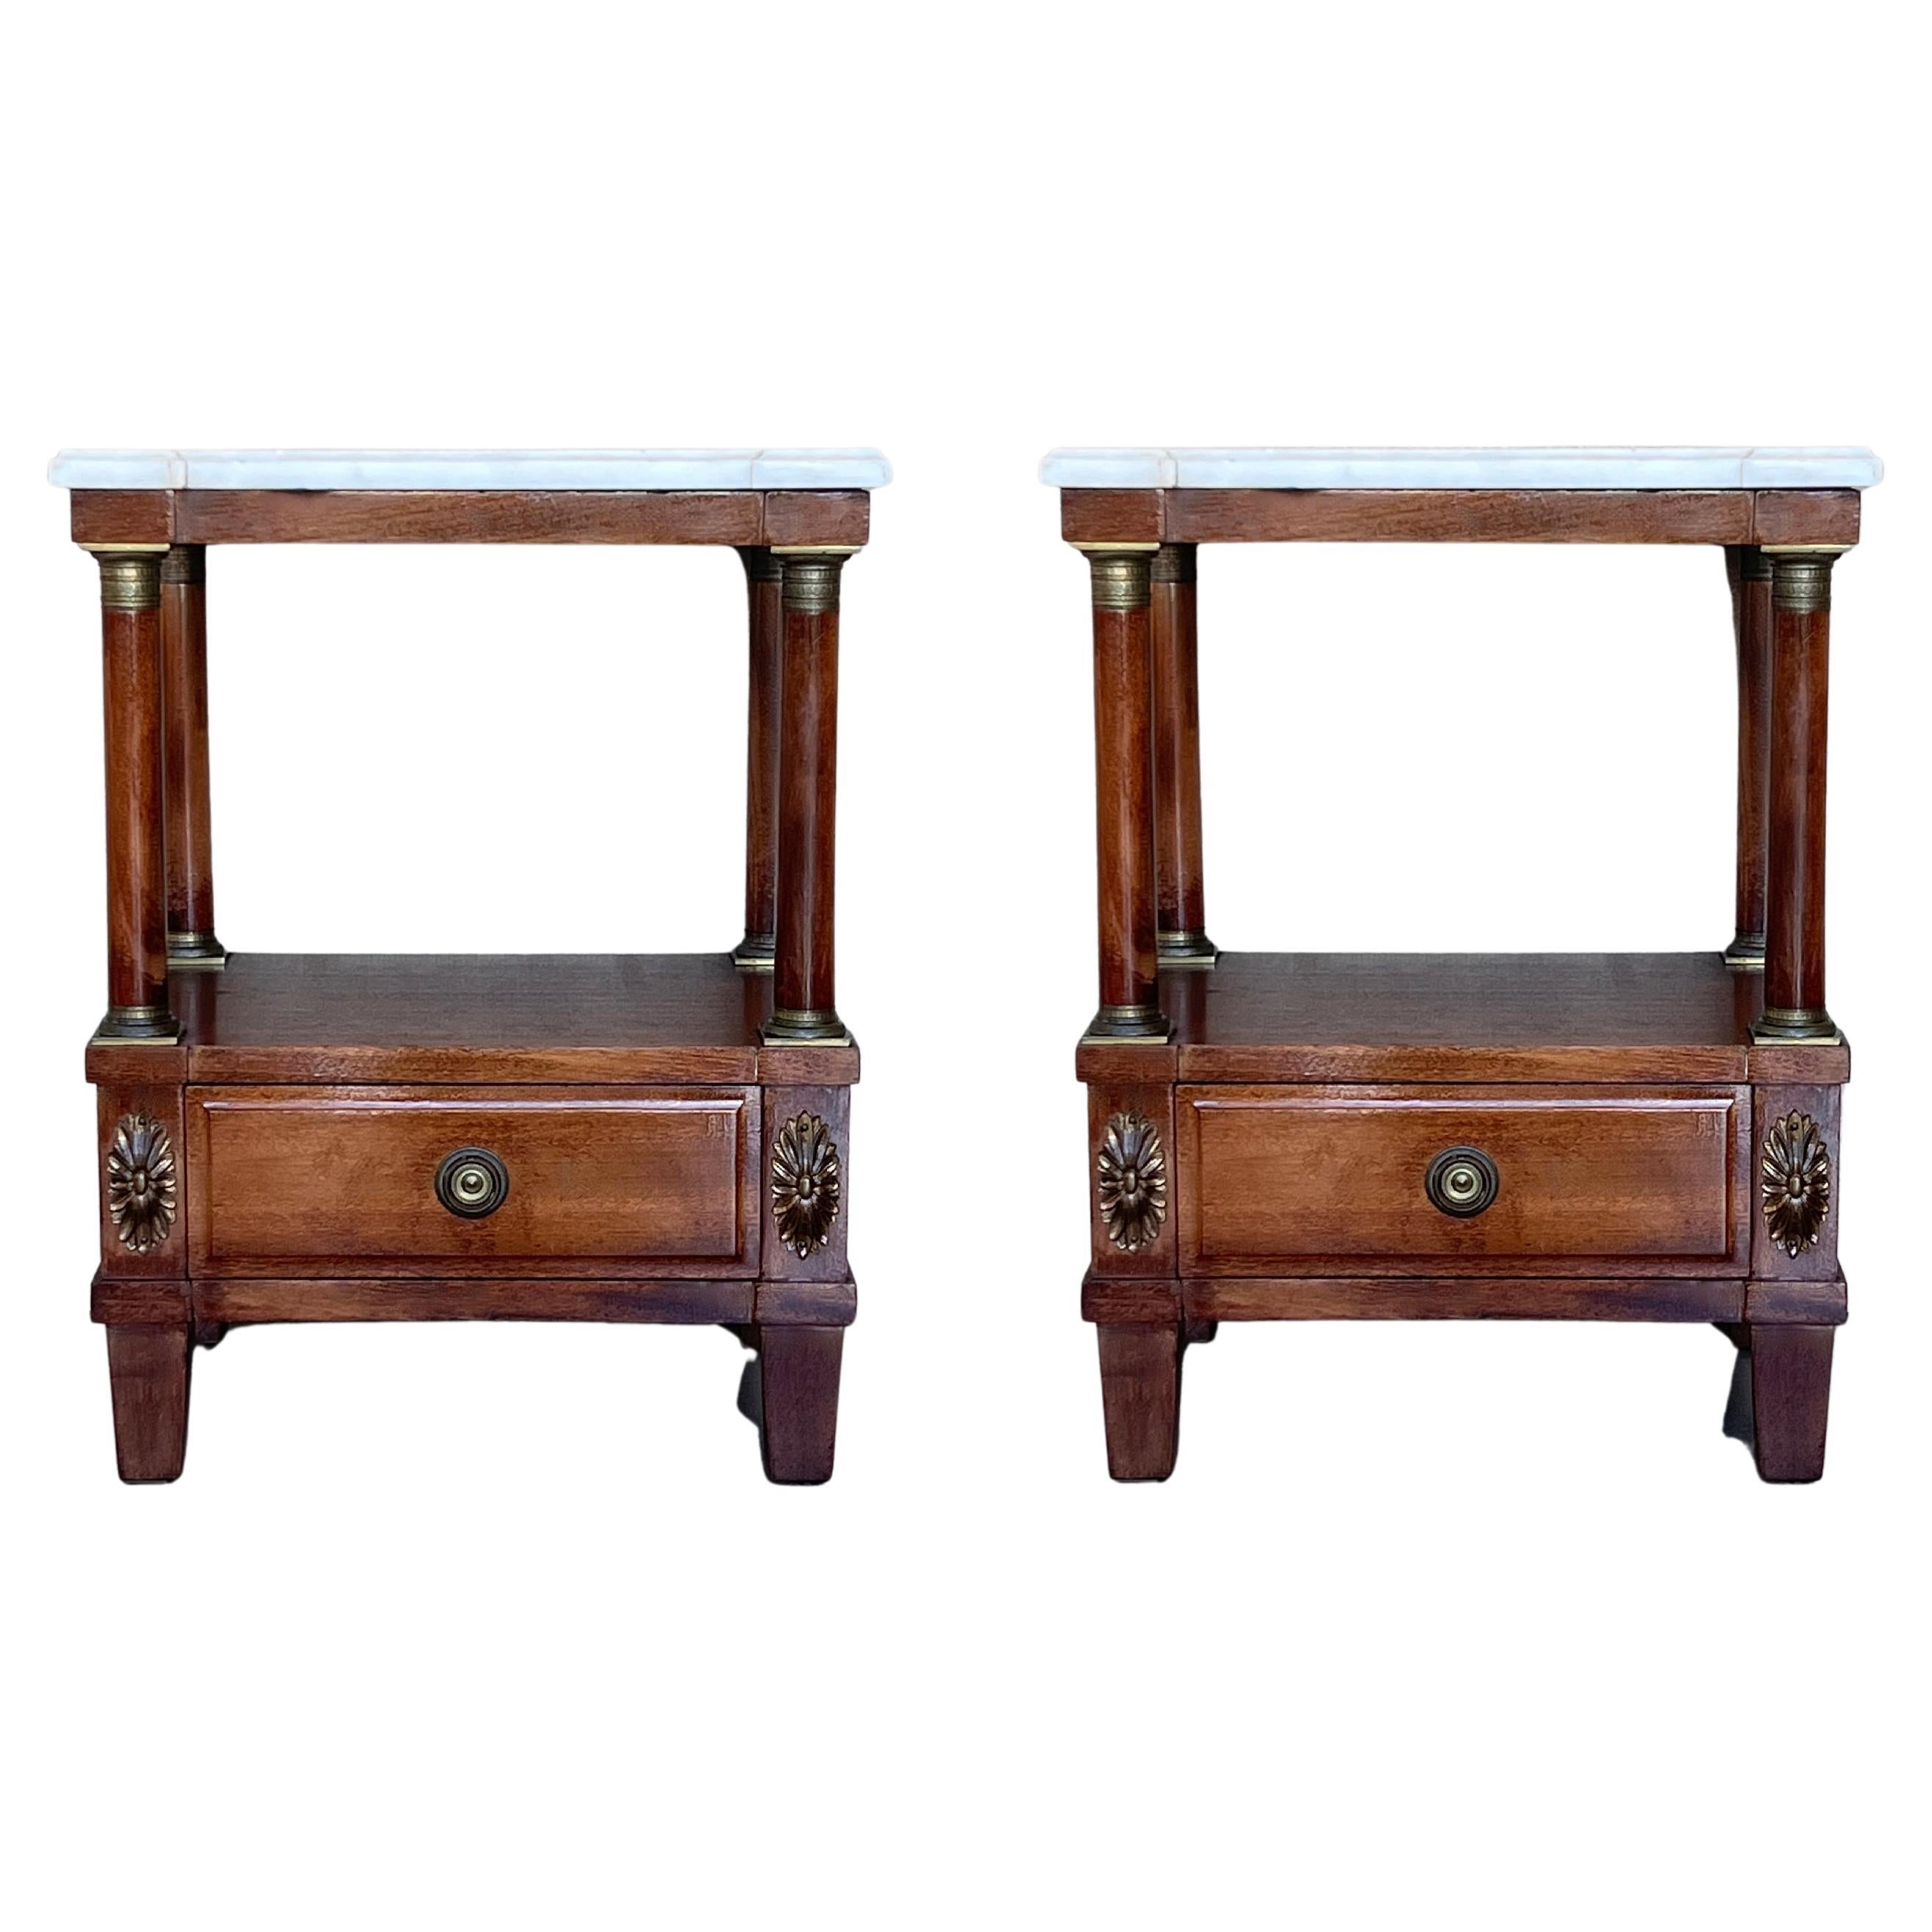 Pair of Empire Style Marble-Top Nightstands with shelve and low drawer